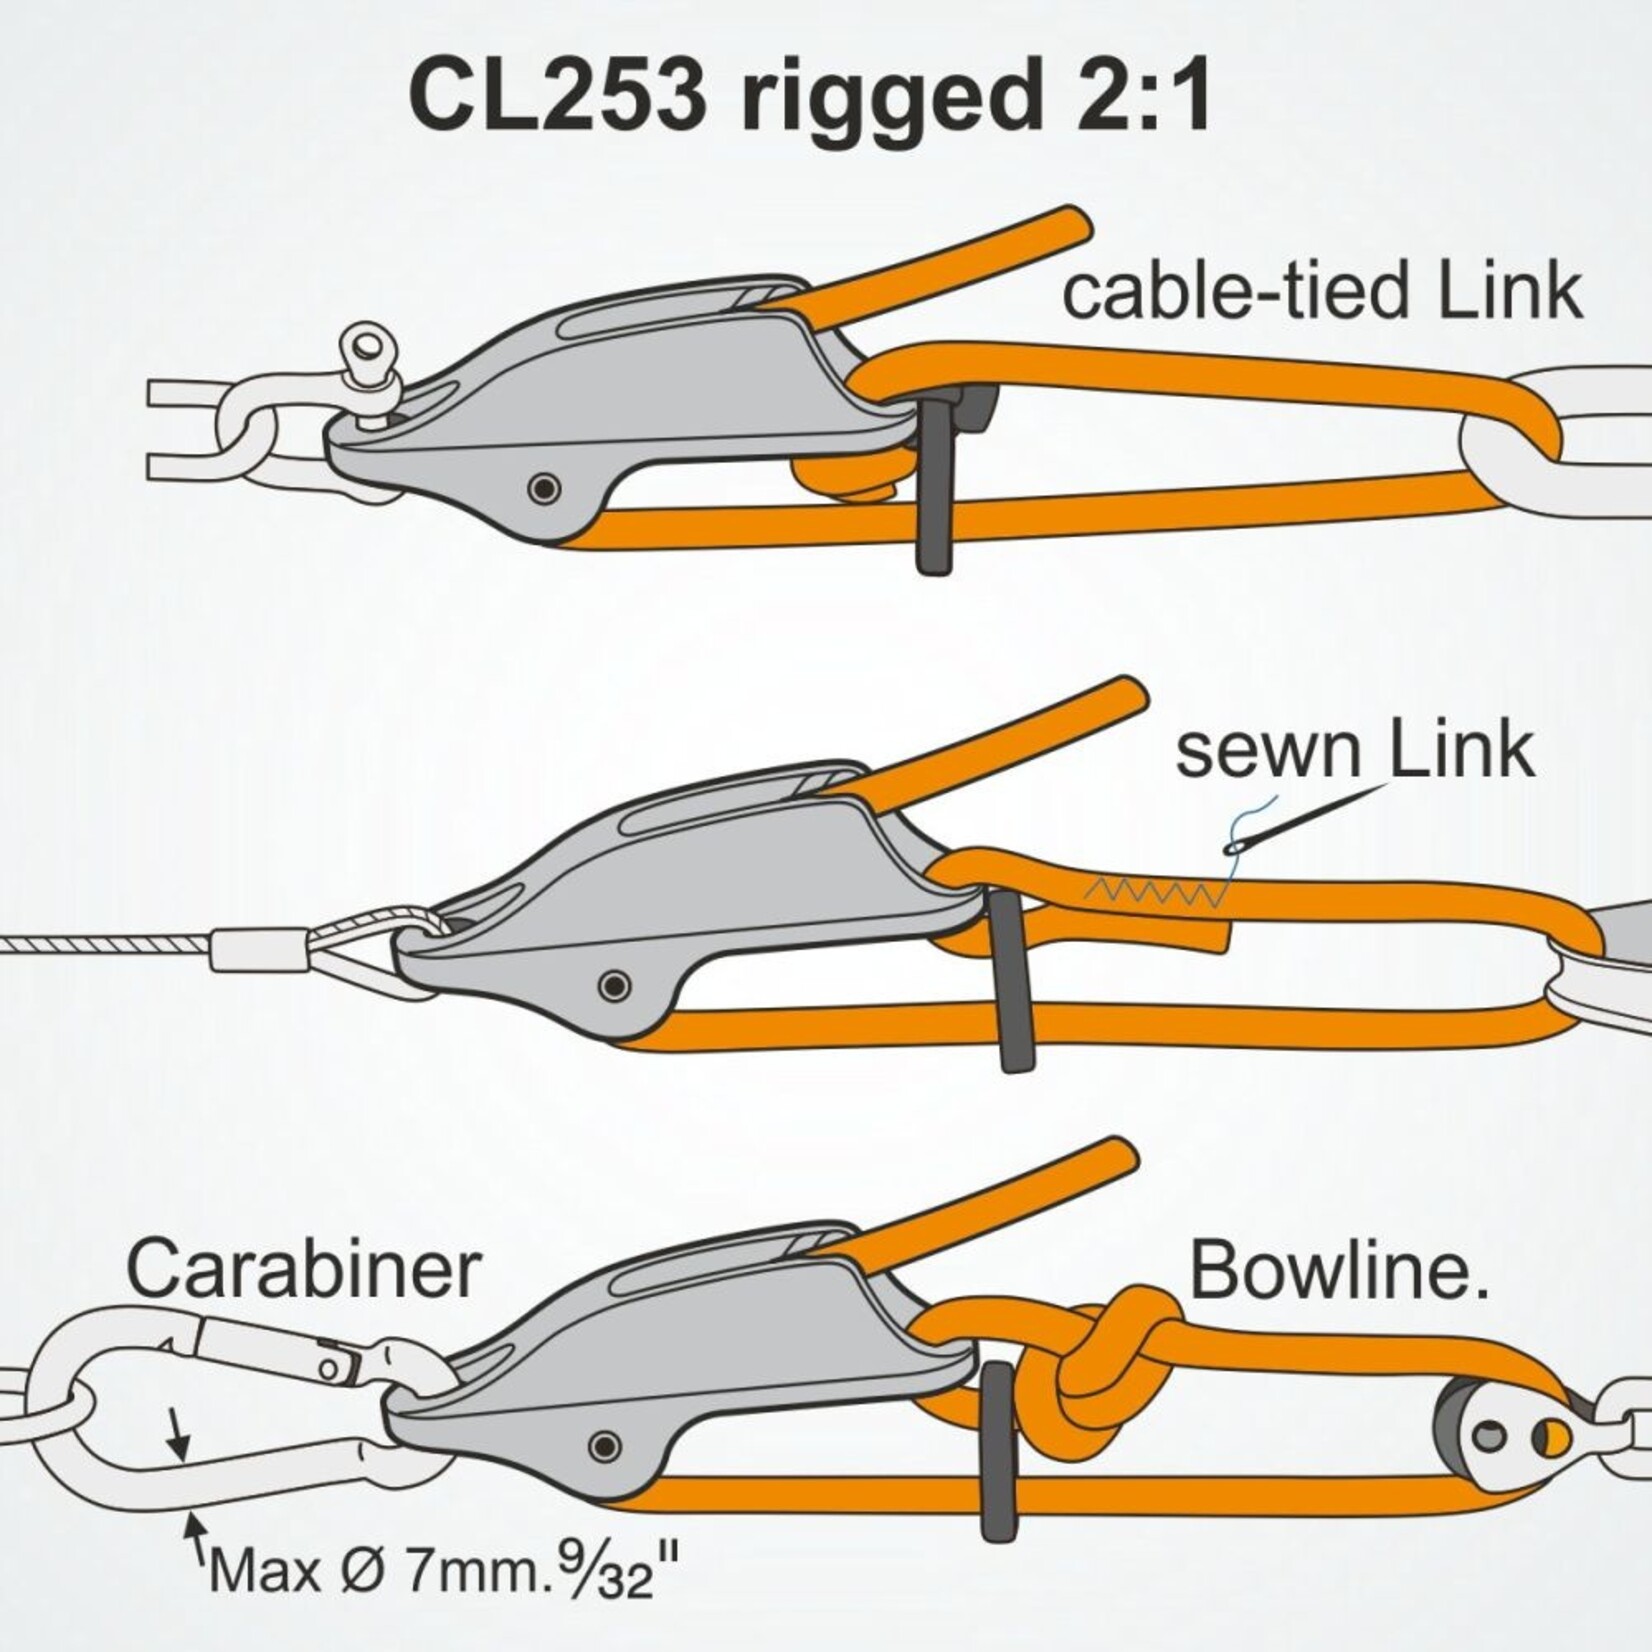 Clamcleat Trapeze & Vang Cleat zilver (incl. PTLINK)